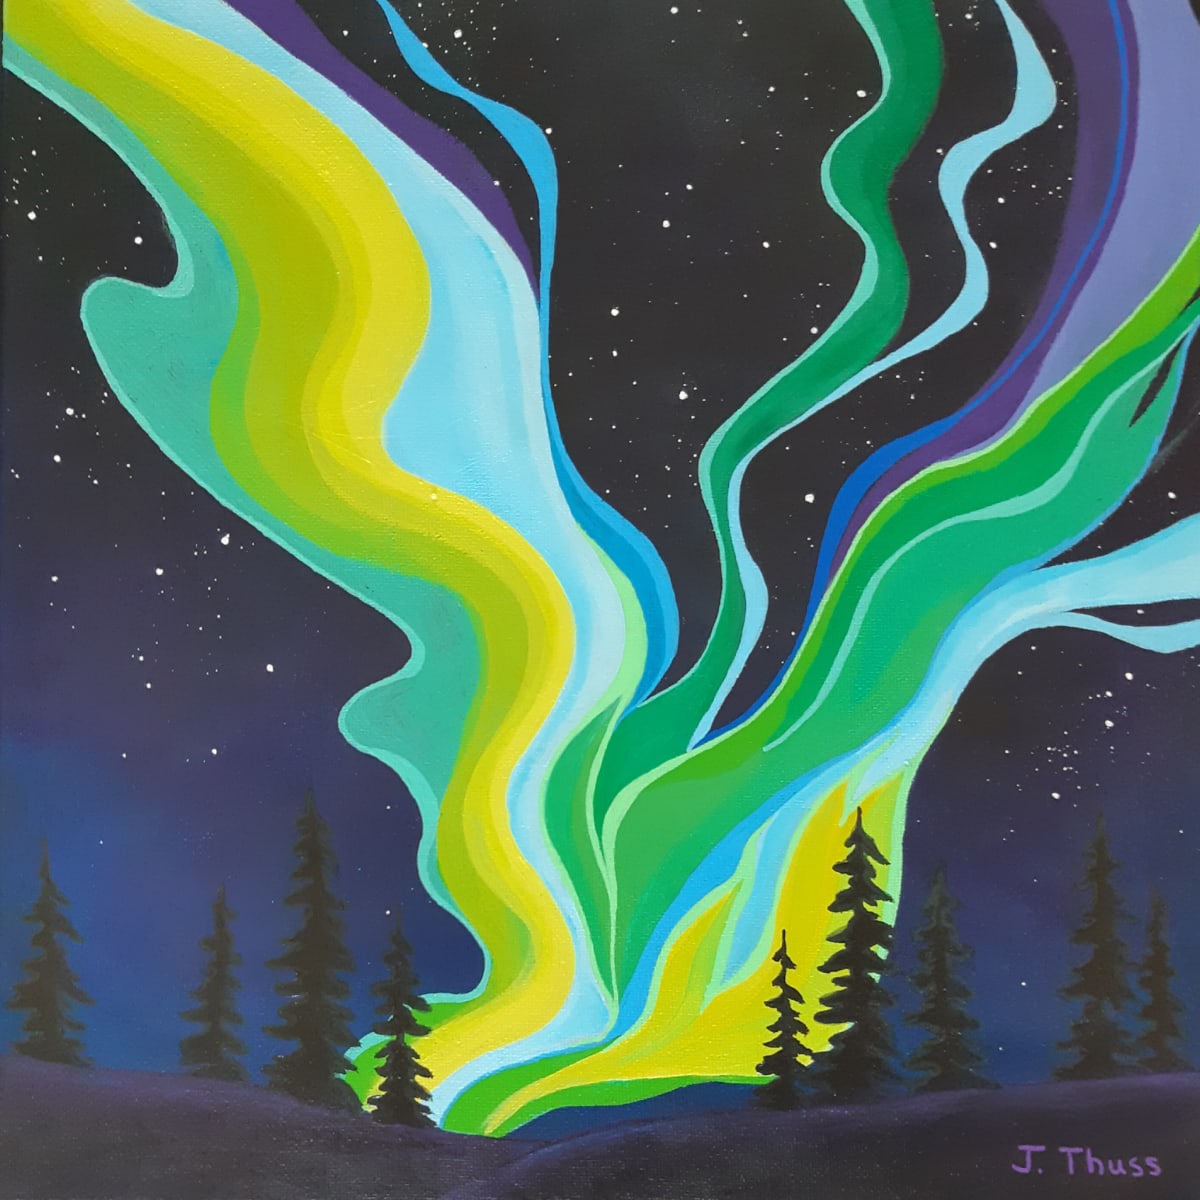 Aurora Borealis by Jane Thuss  Image: Beautiful colours of blue, green and purple light, dance across the northern night sky